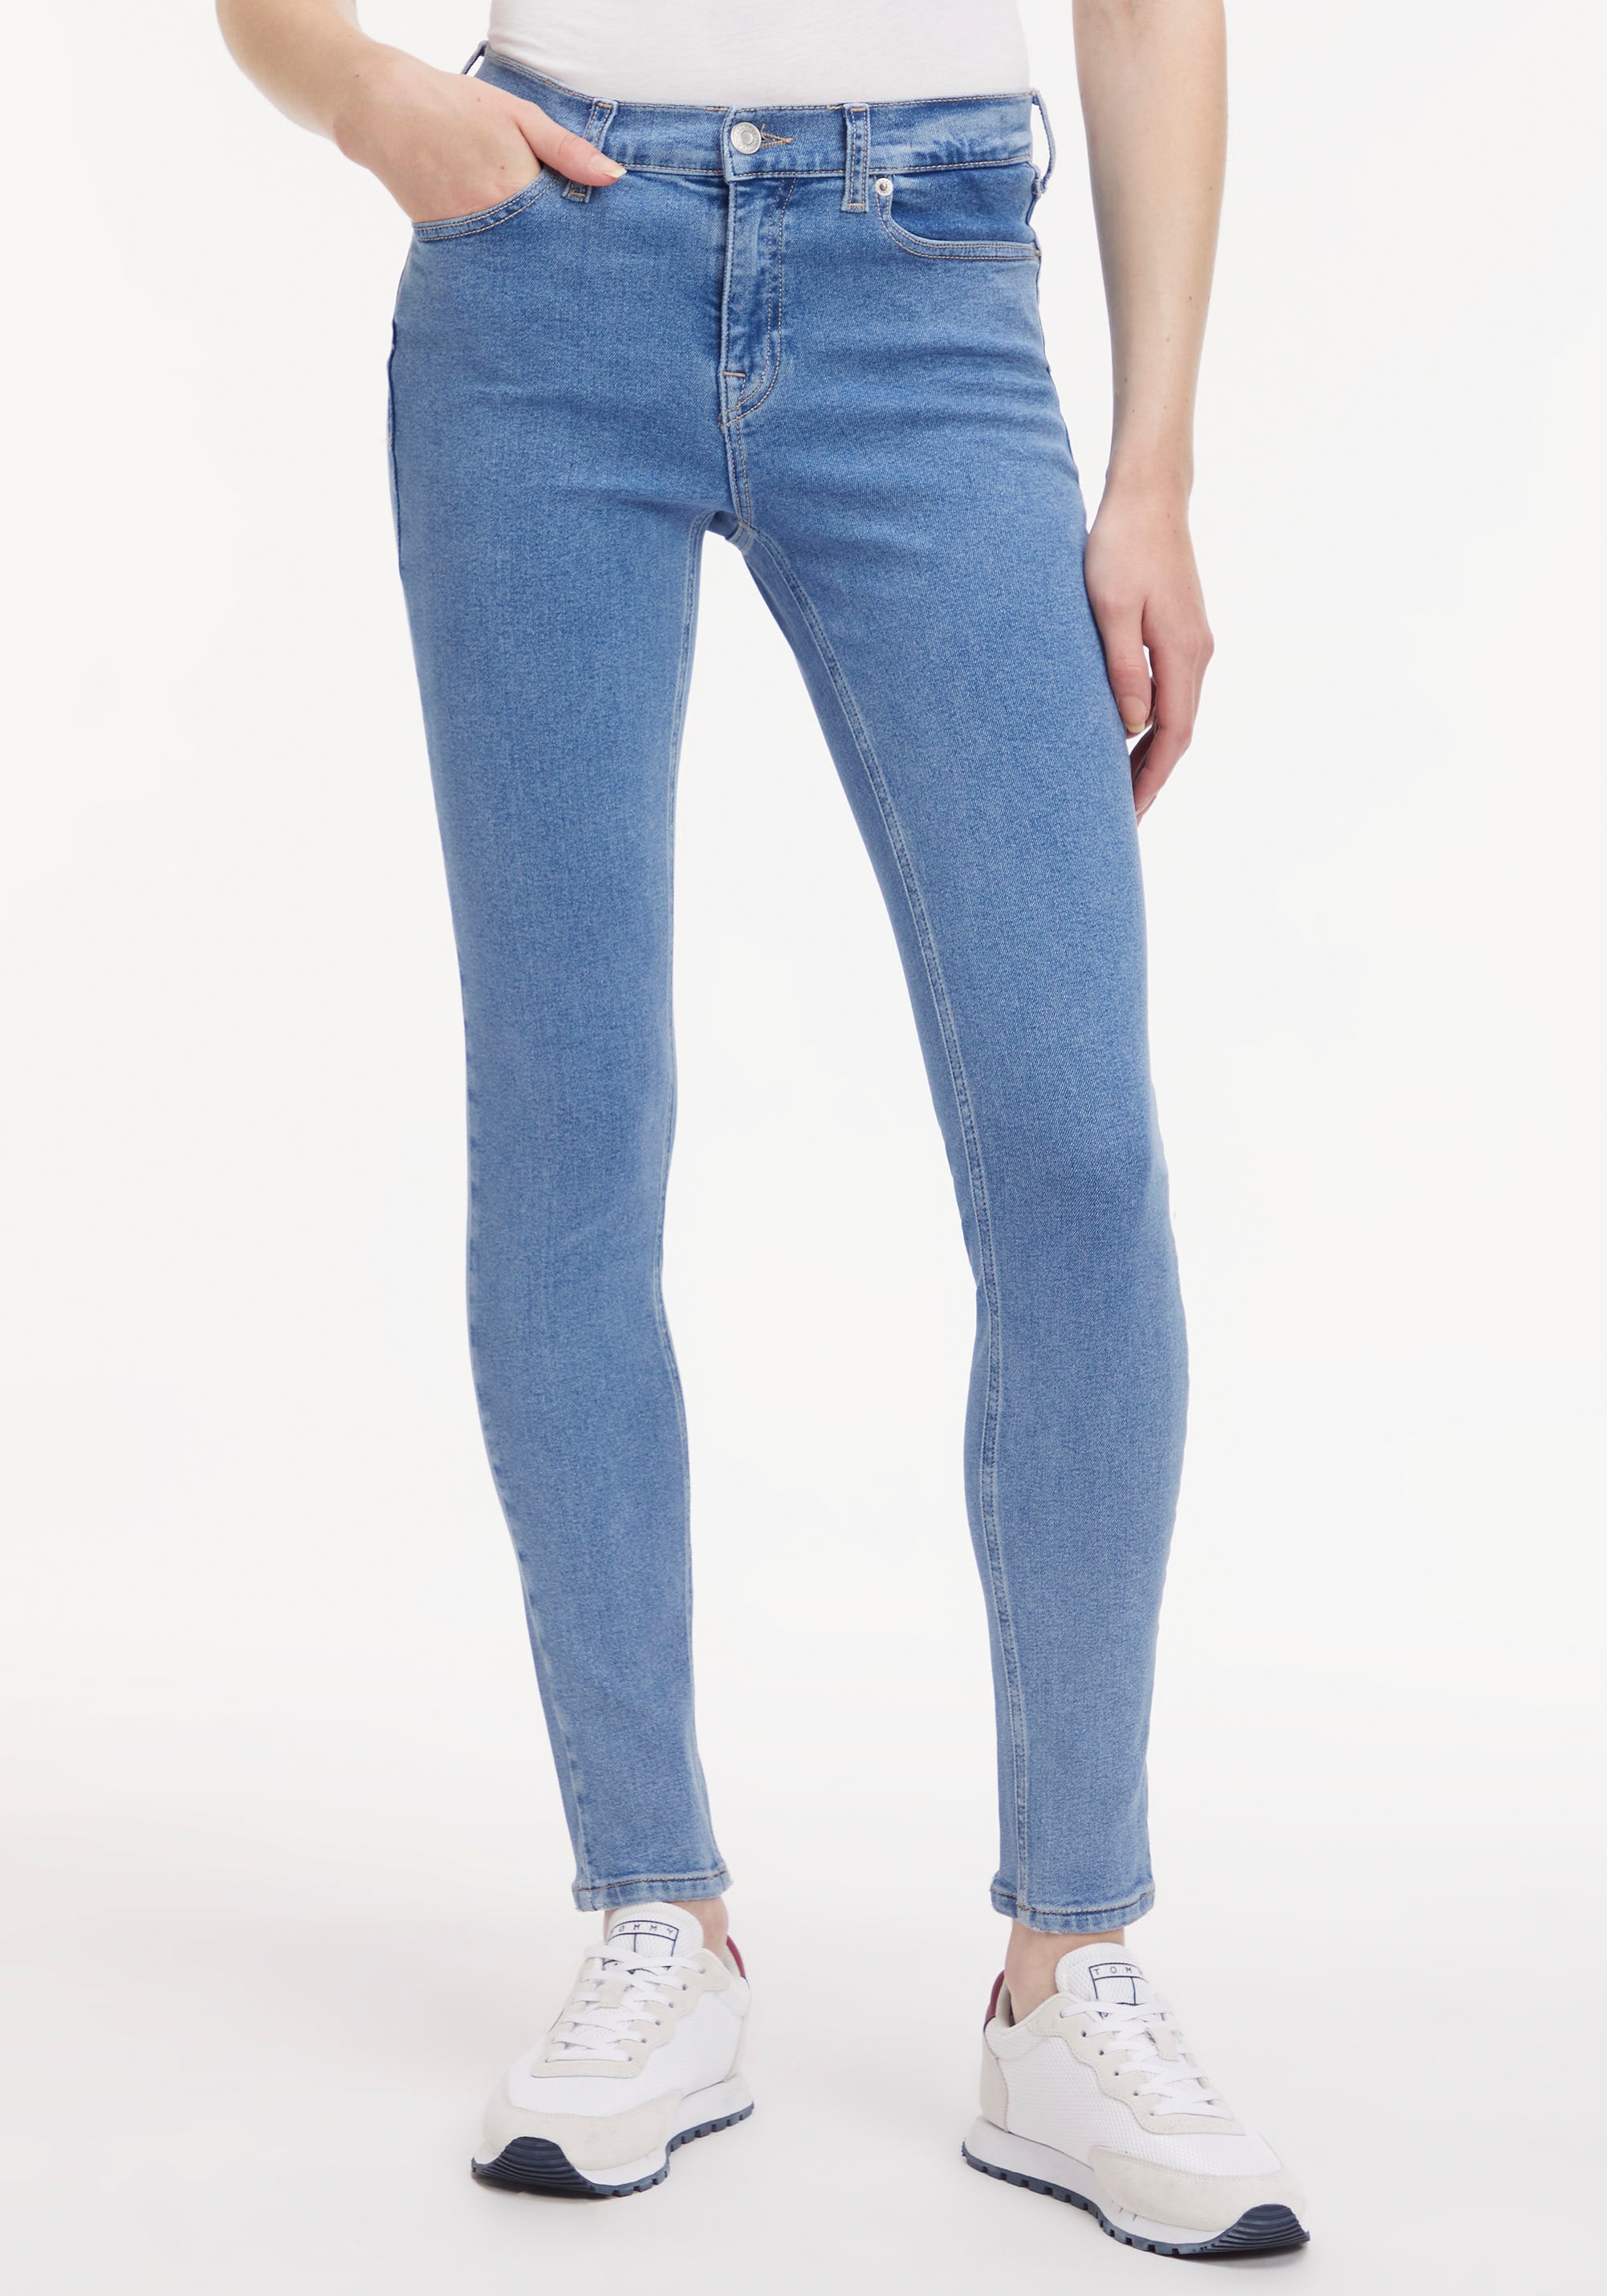 hinten Skinny-fit-Jeans Jeans Label-Badge bei Tommy ♕ mit & Jeans »Nora«, Passe Tommy